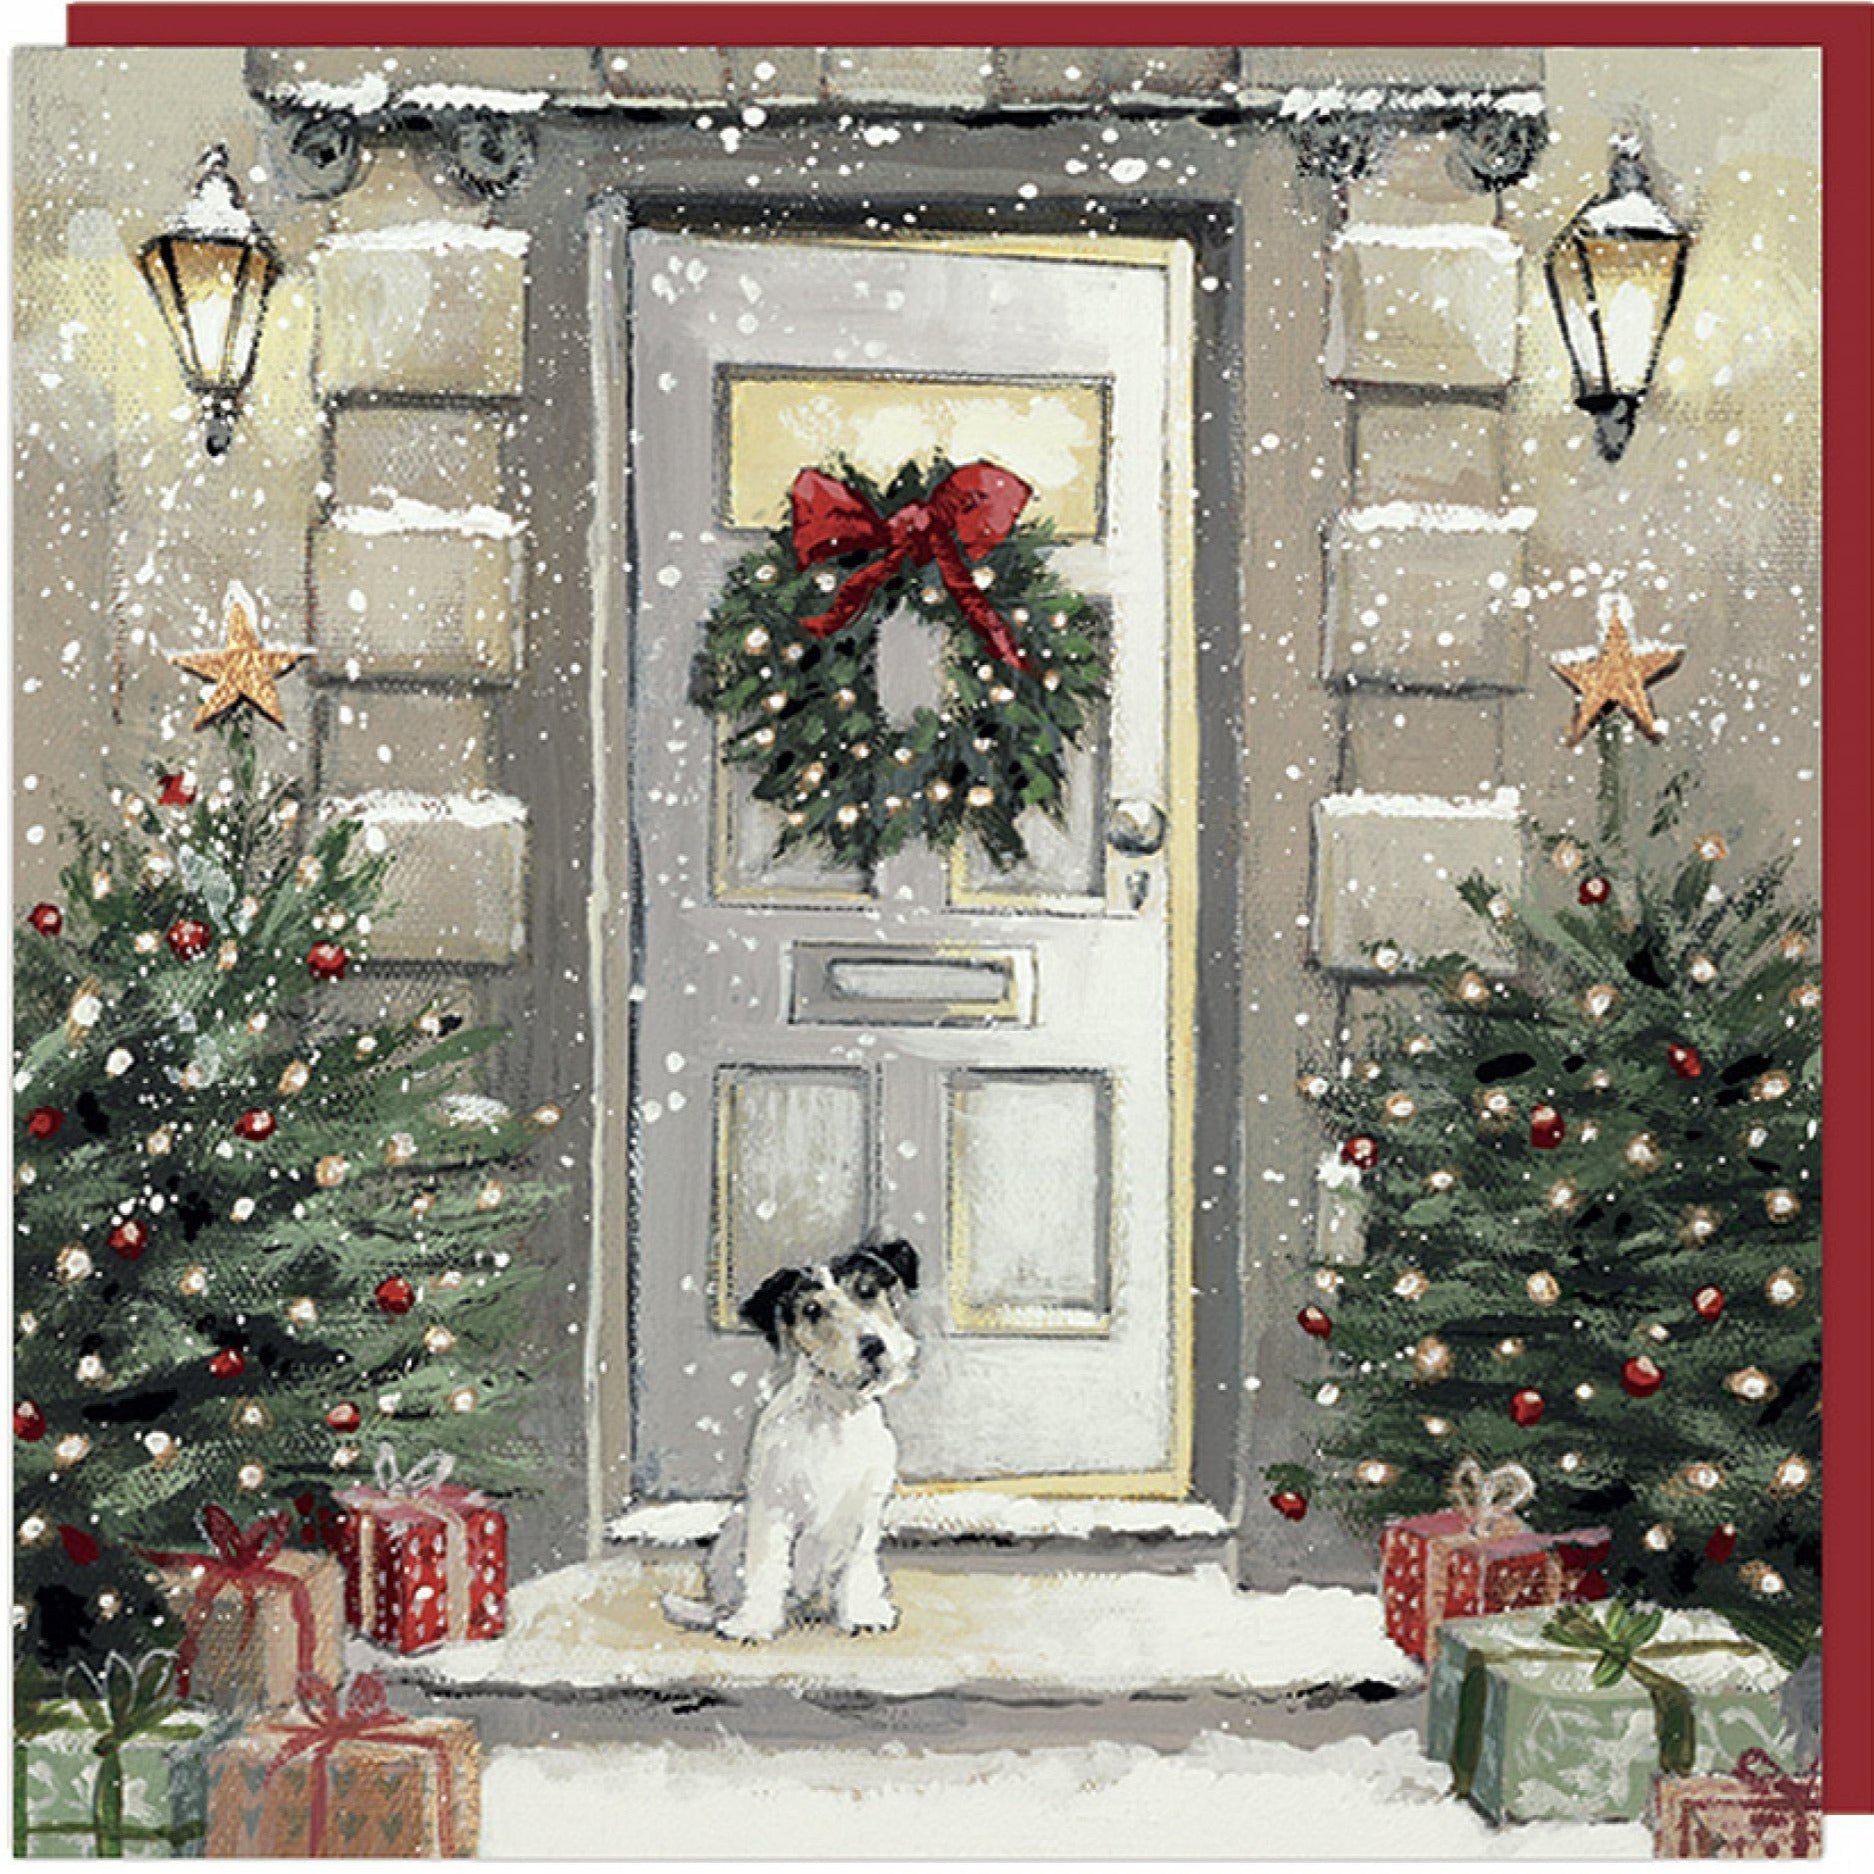 Home for Christmas Charity Christmas Cards - Pack of 6 - Duck Barn Interiors